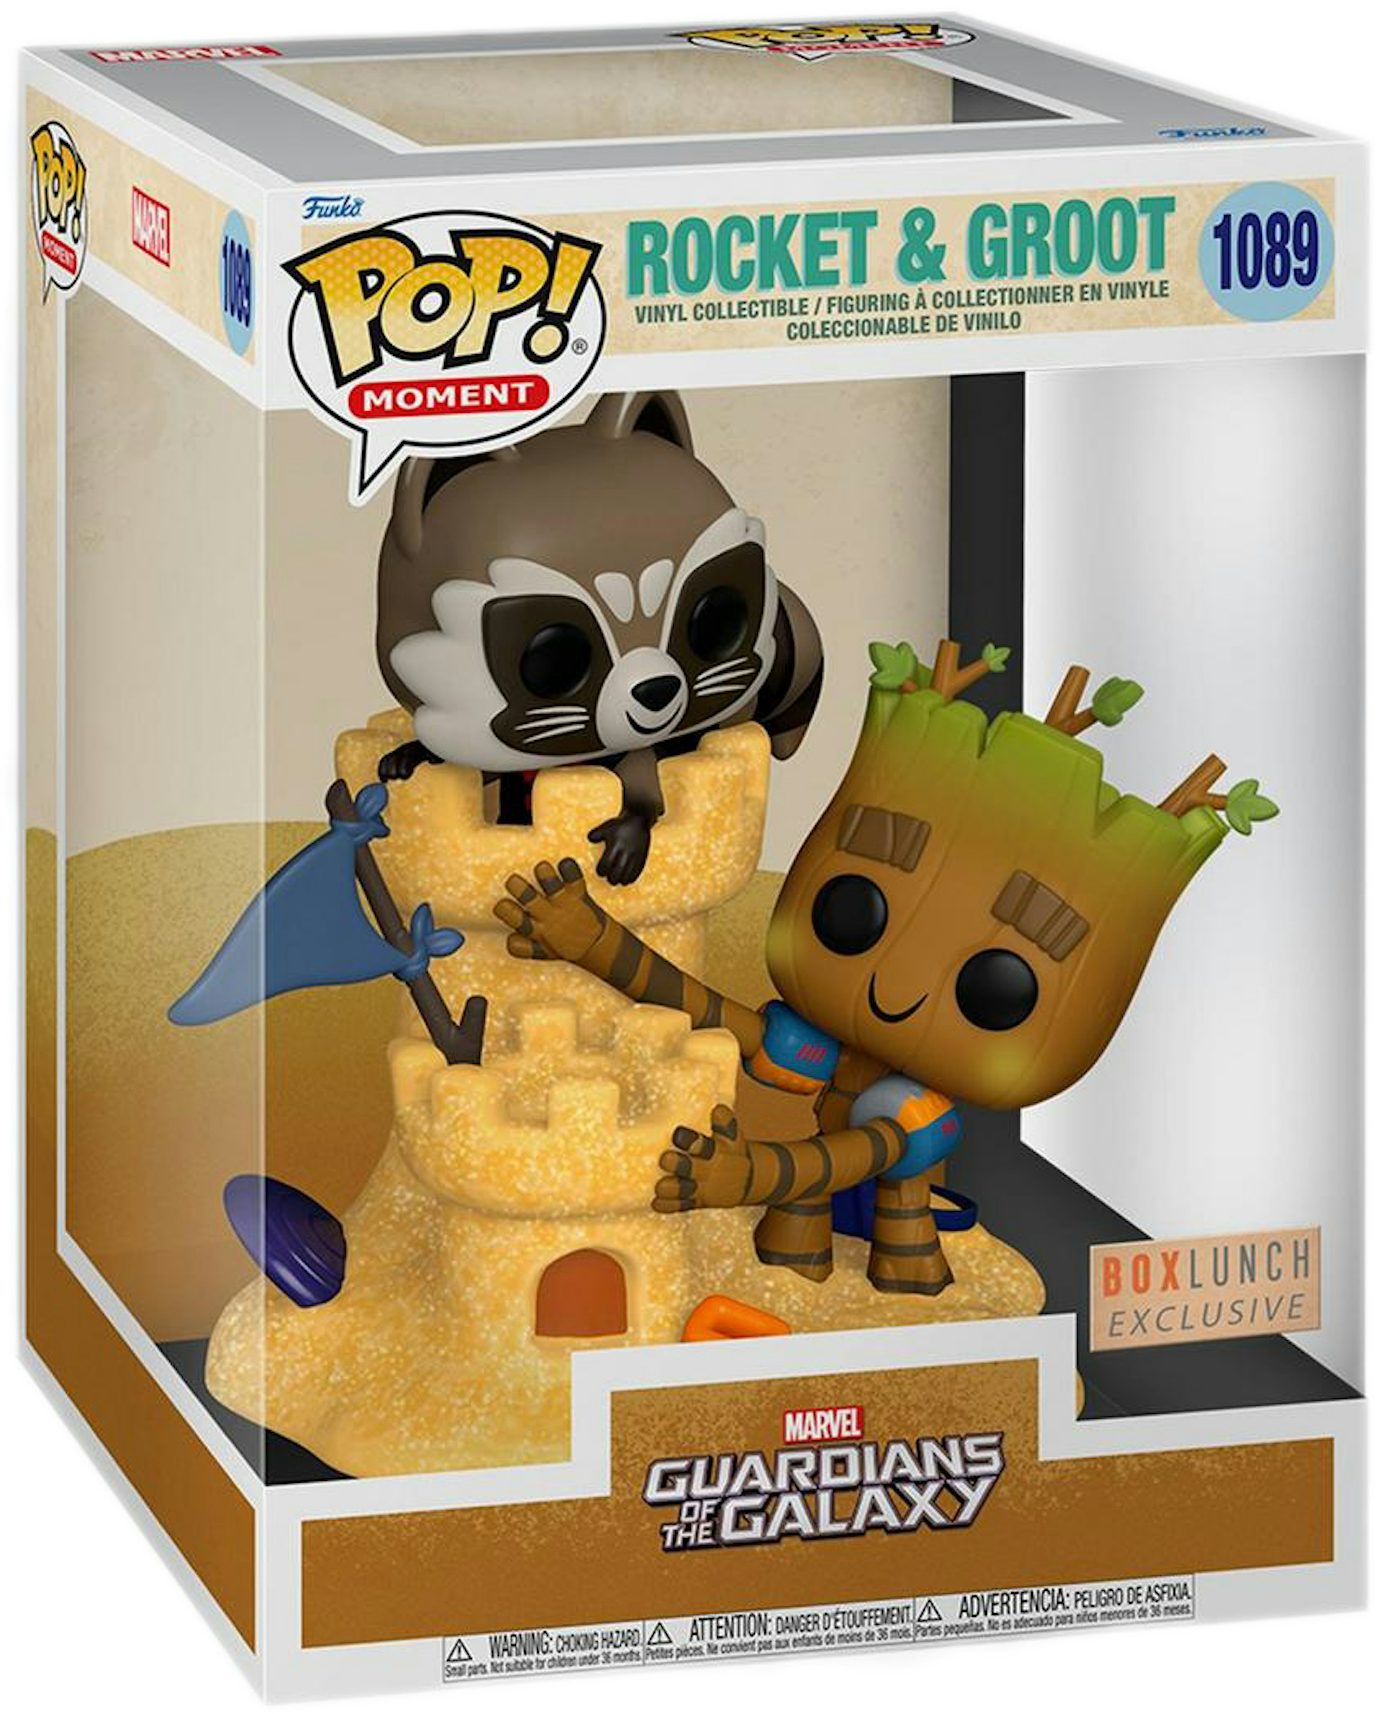 Funko Pop! Moment Marvel Guardians of The Galaxy Rocket and Groot Box Lunch Exclusive Figure #1089